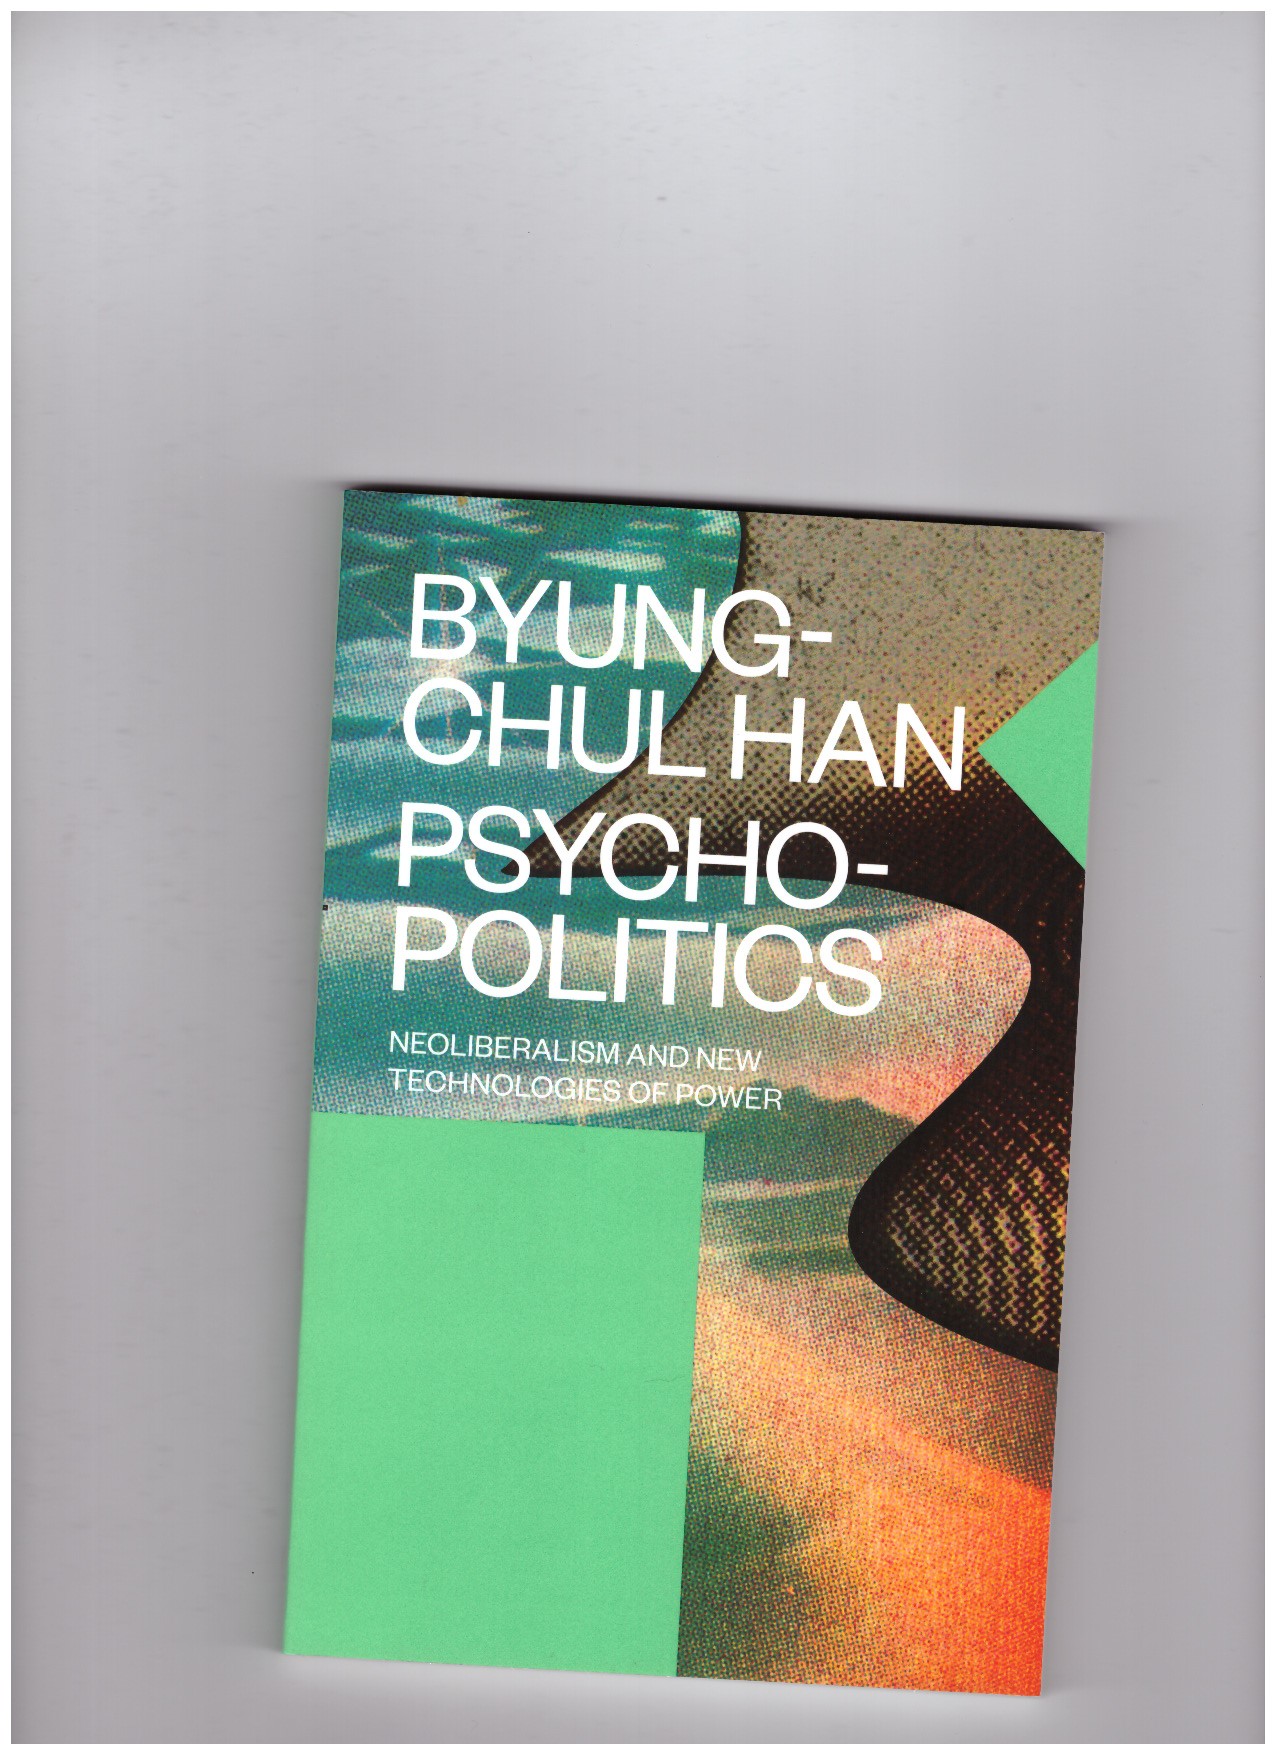 HAN, Byung-Chul - Psychopolitics. Neoliberalism and new technologies of power